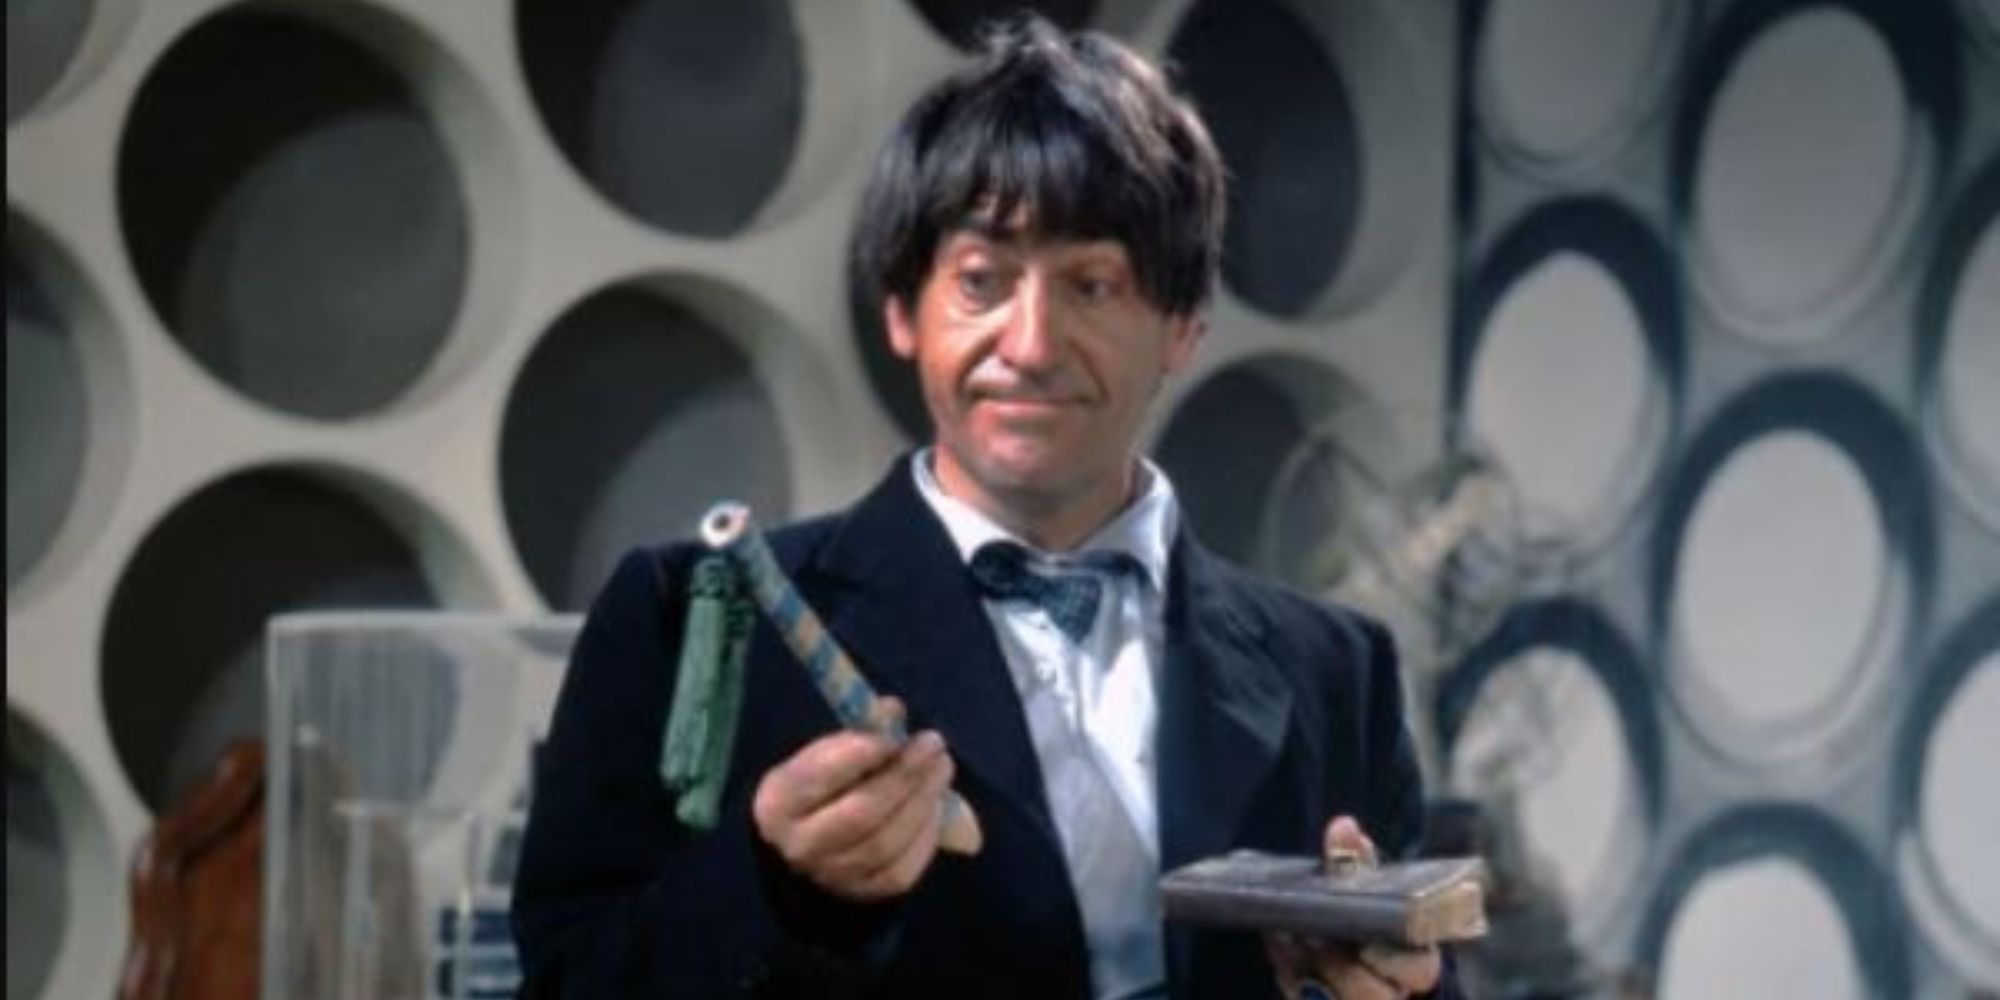 2nd Doctor in the TARDIS holding his diary and a recorder